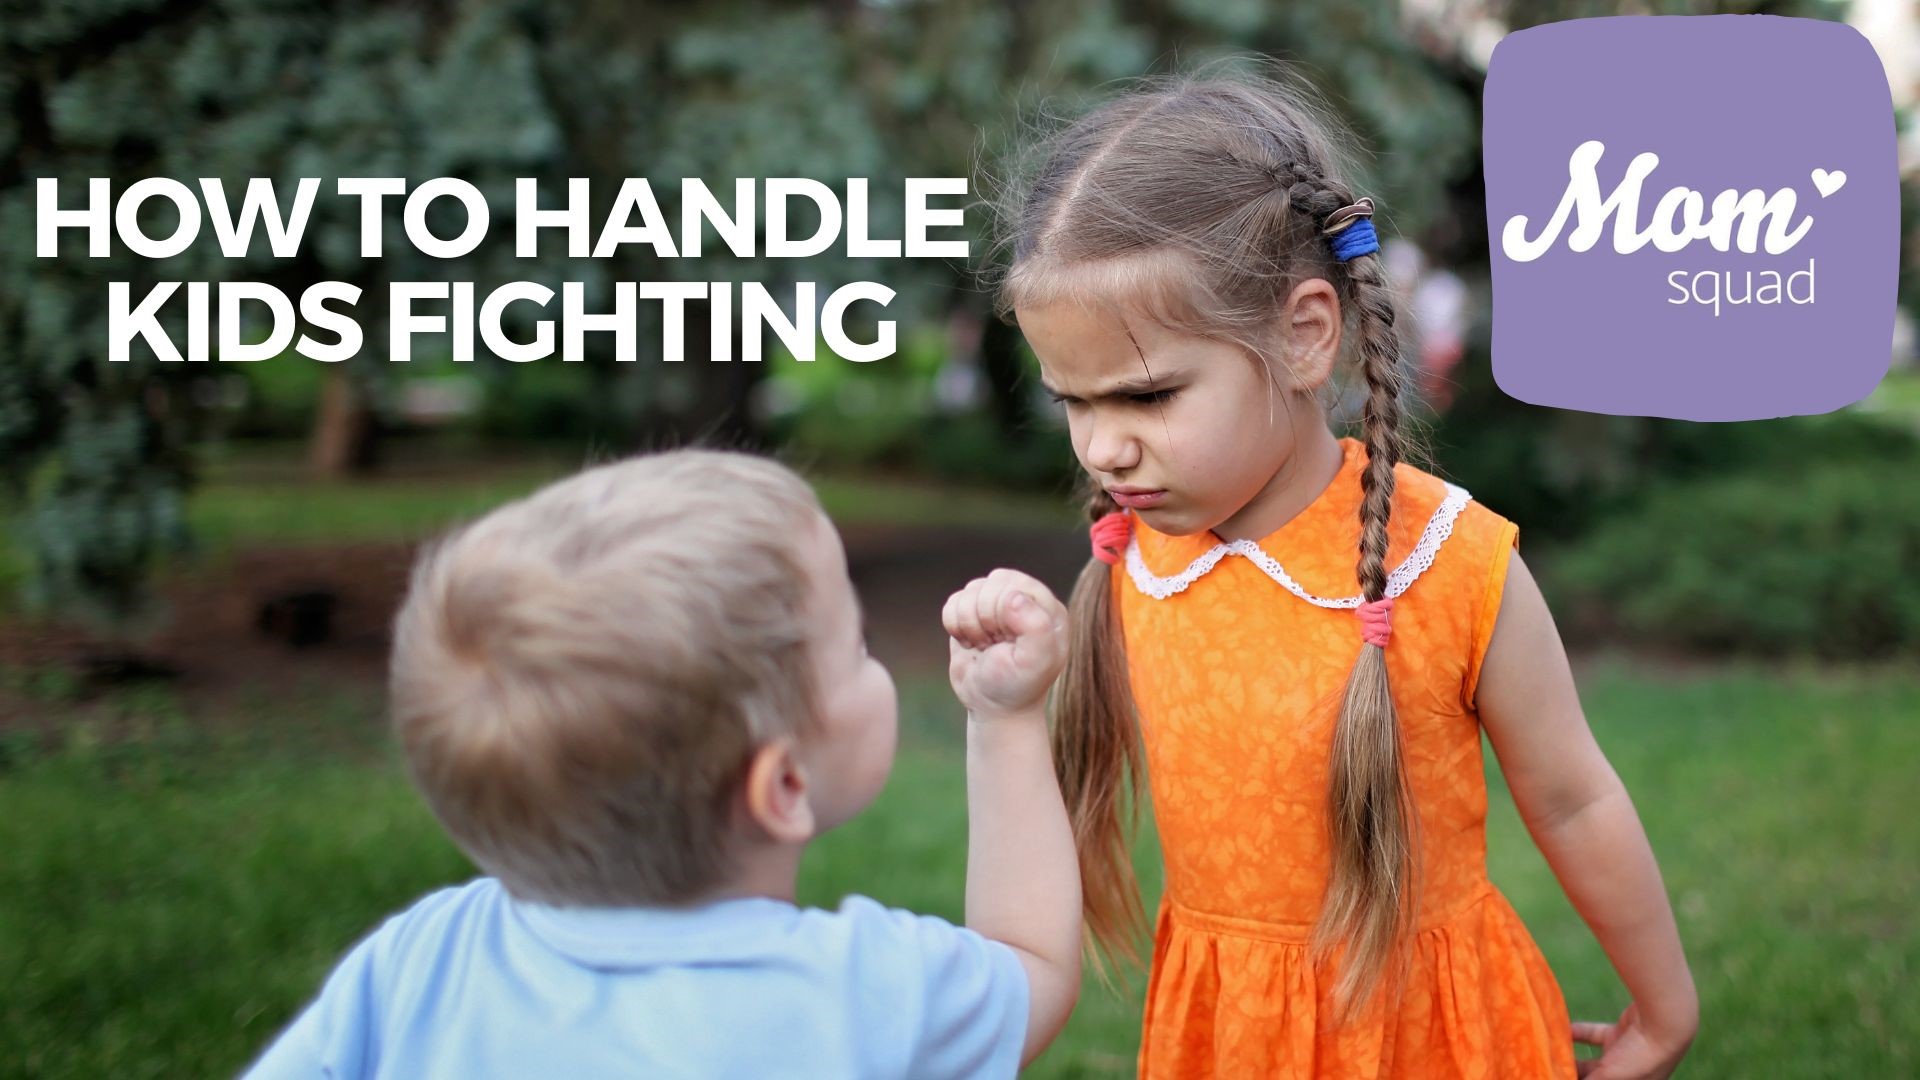 Maureen Kyle sits down with a relationship expert to talk about how to handle your kids fighting with your friend's kids, and how to communicate friendship issues.